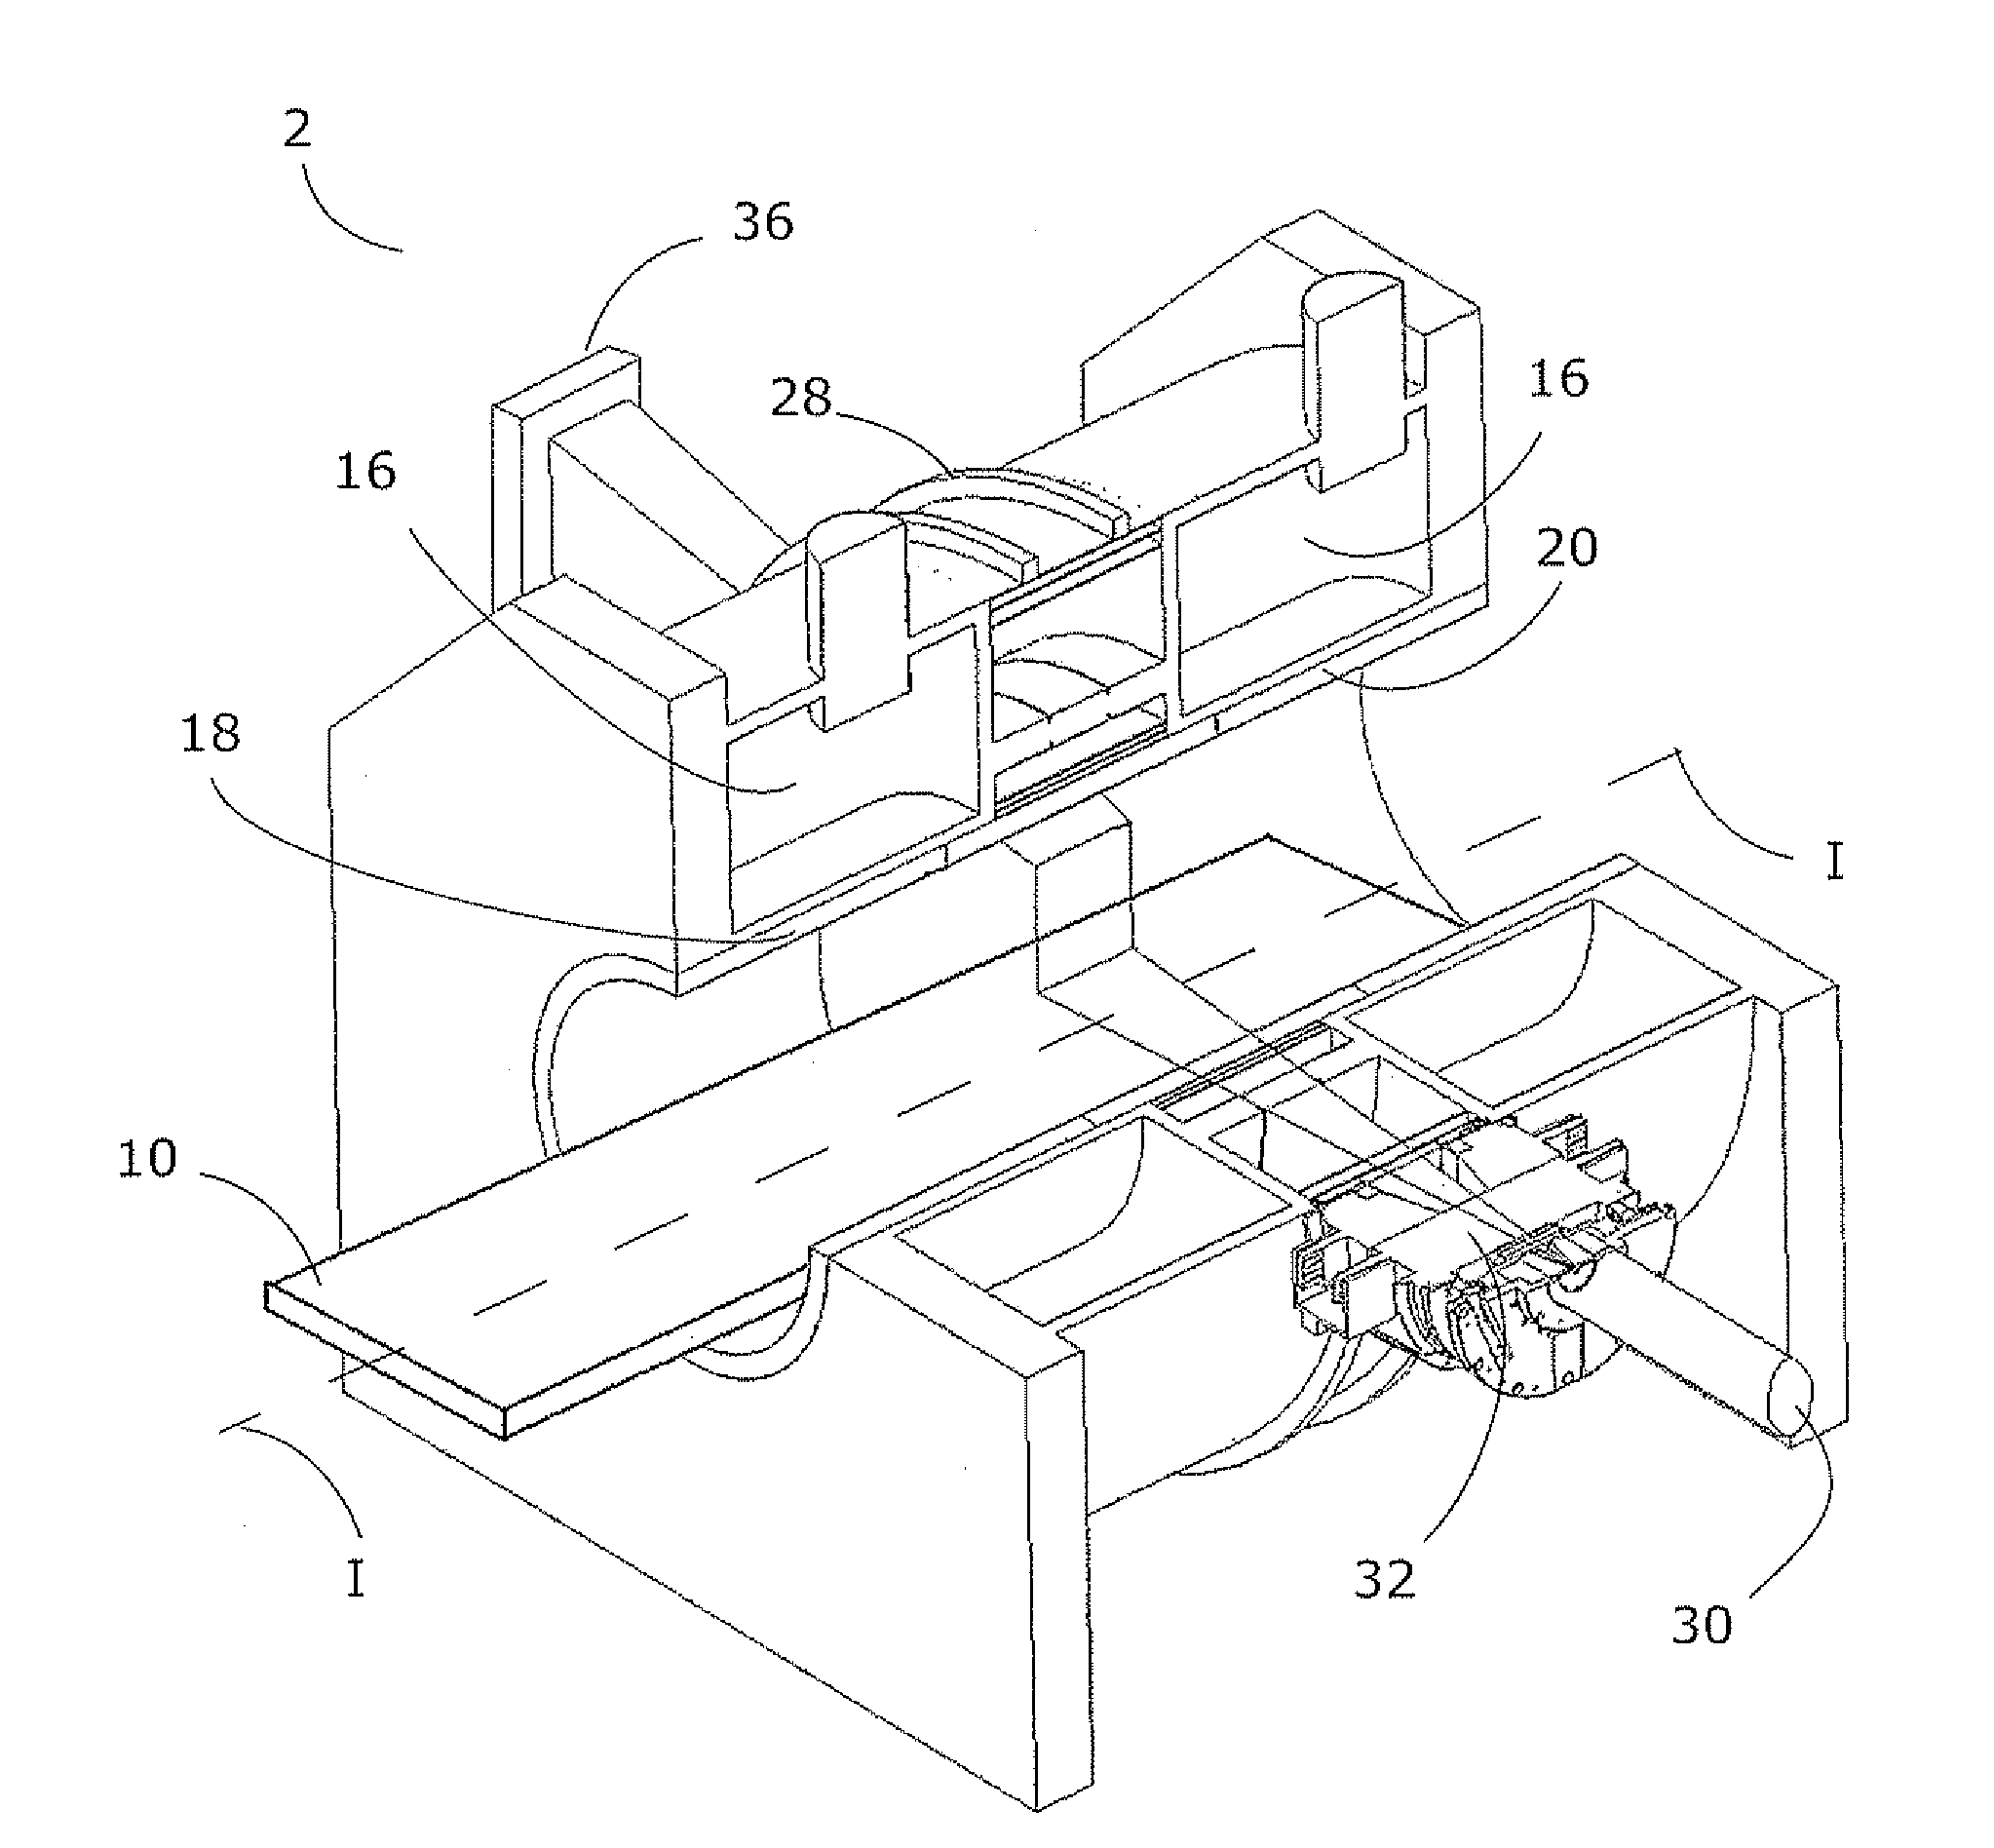 Radiotherapy and imaging apparatus